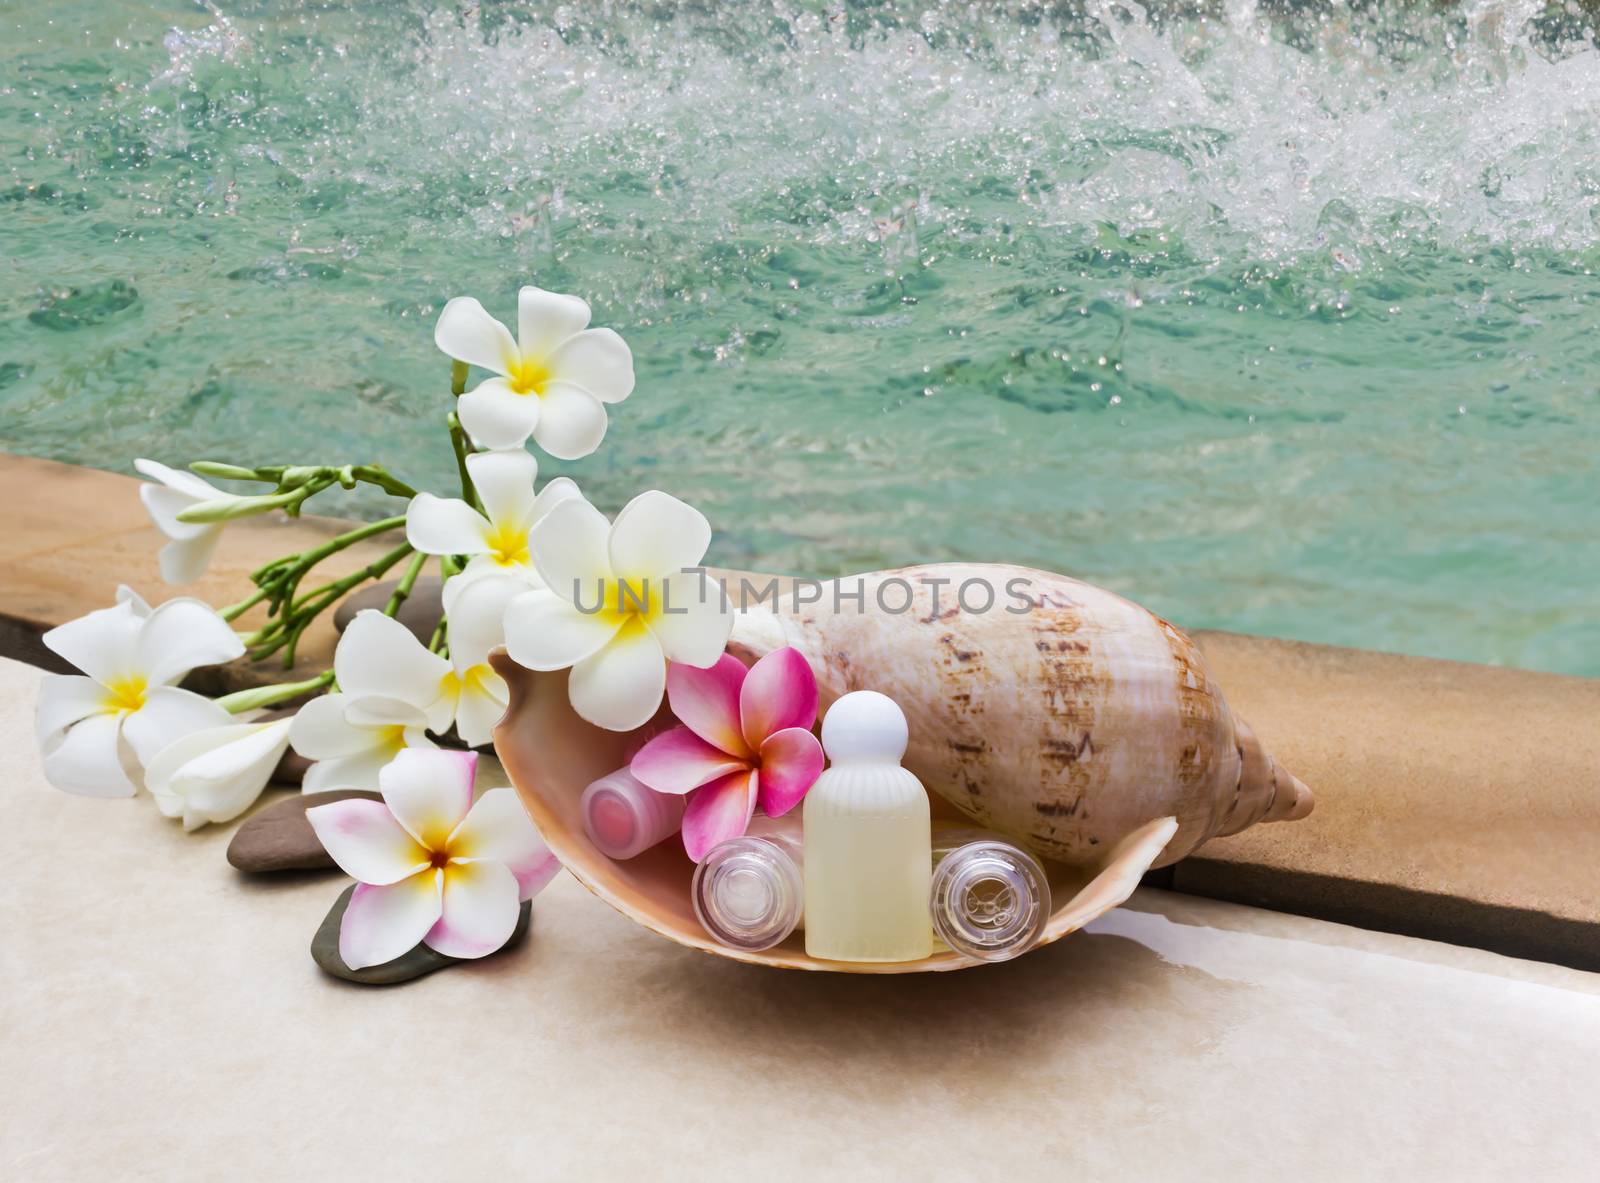 Mini set of bubble bath and shower gel in sea conch shell with beautiful flower plumeria or frangipani beside the pool, shampoo conditioner spa set treatment at swiming pool